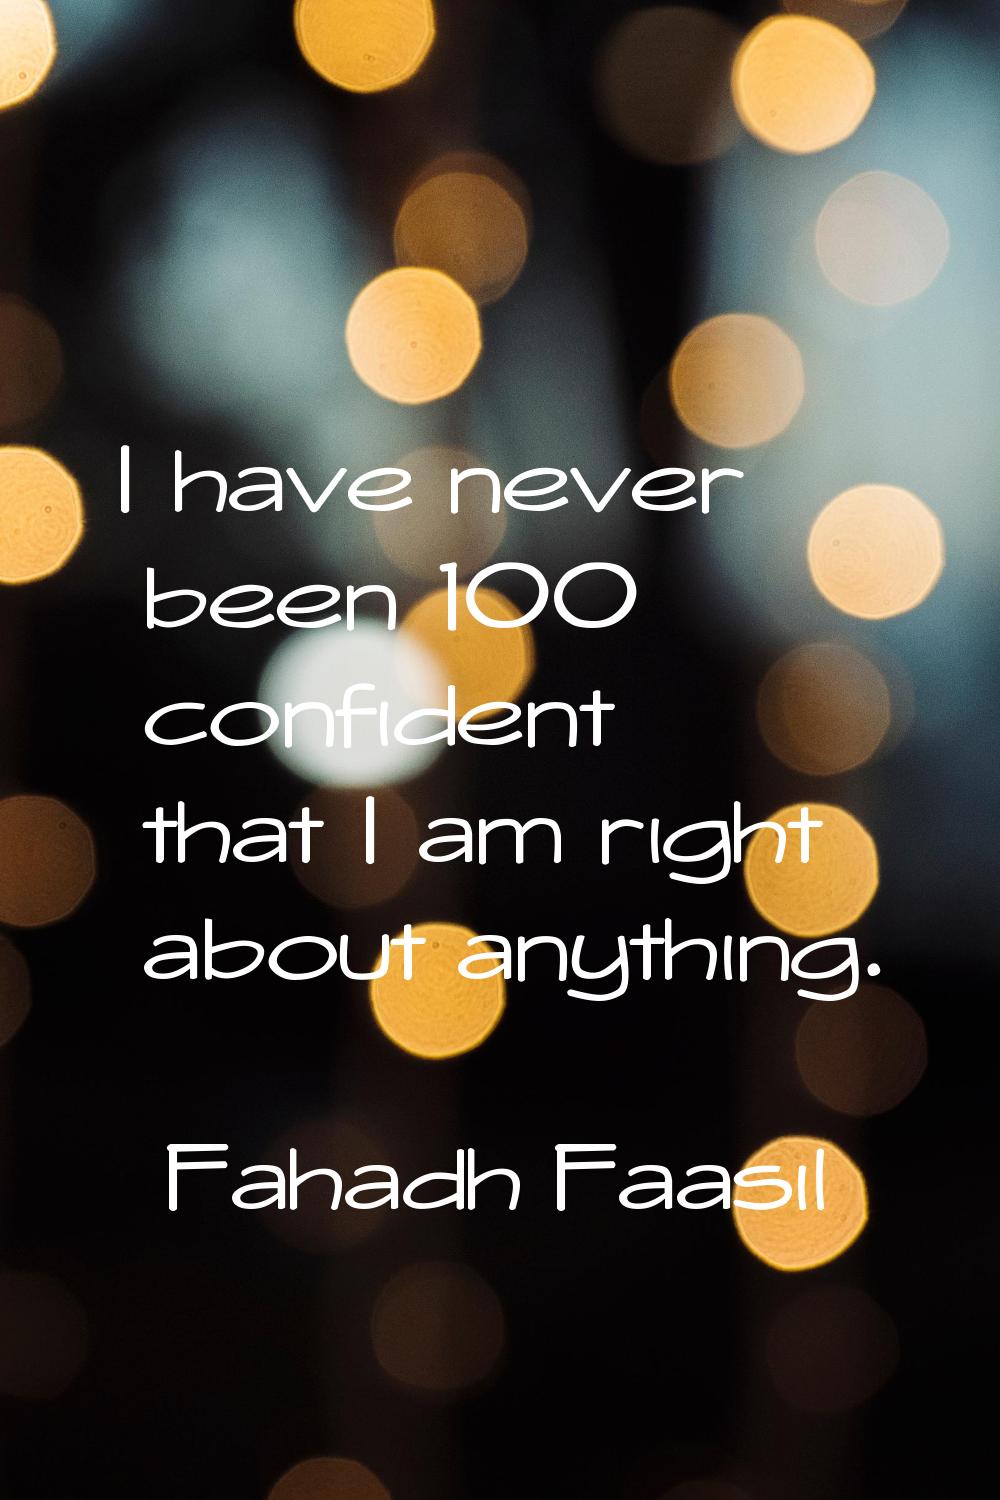 I have never been 100% confident that I am right about anything.